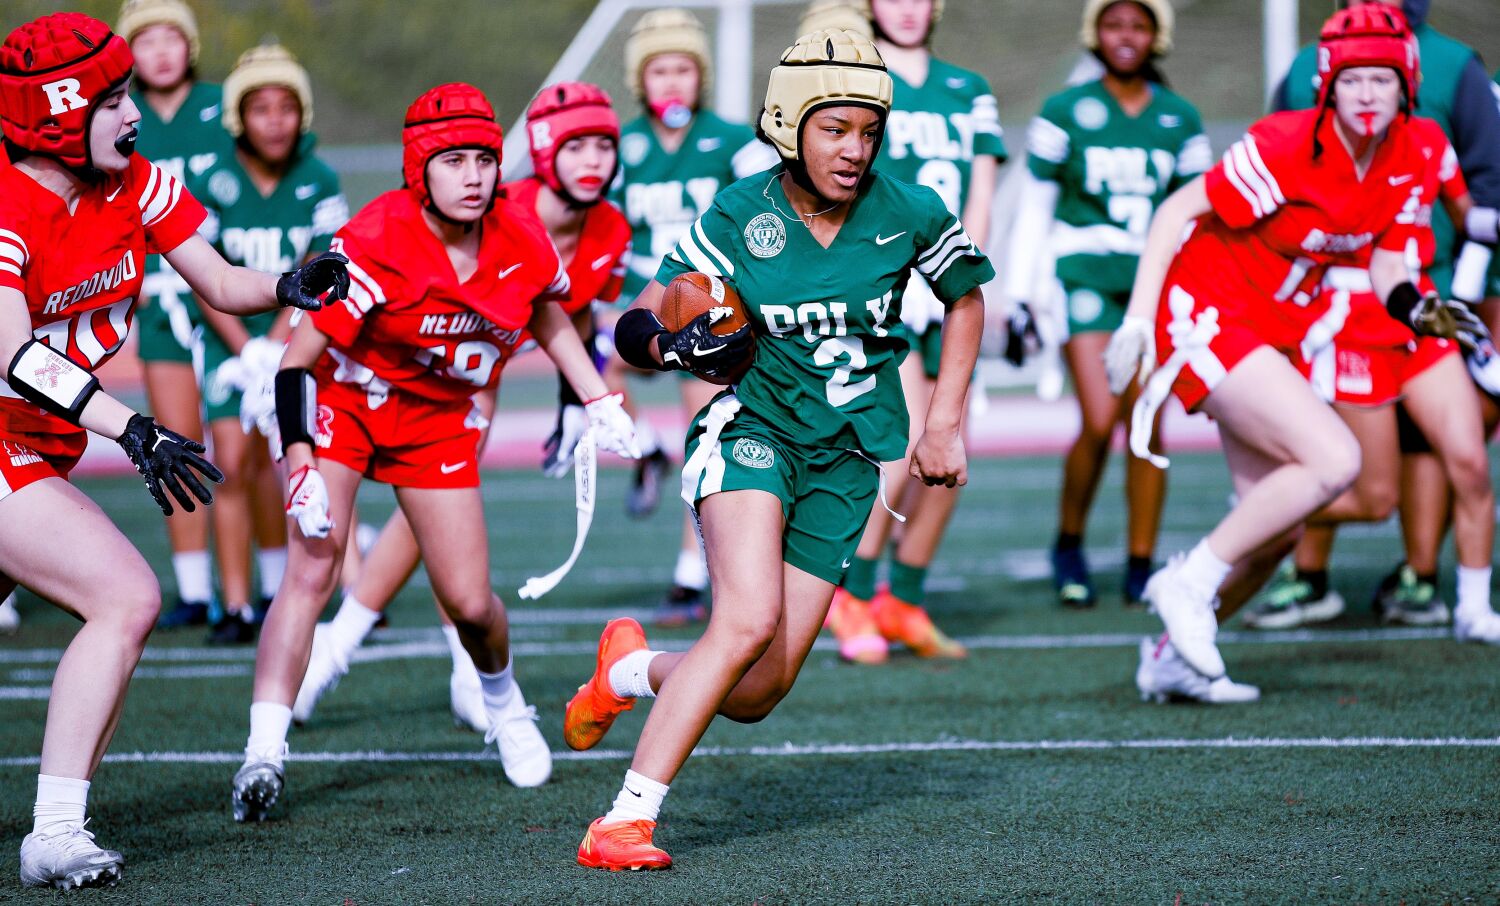 Everything you need to know about CIF adding girls' flag football as official sport